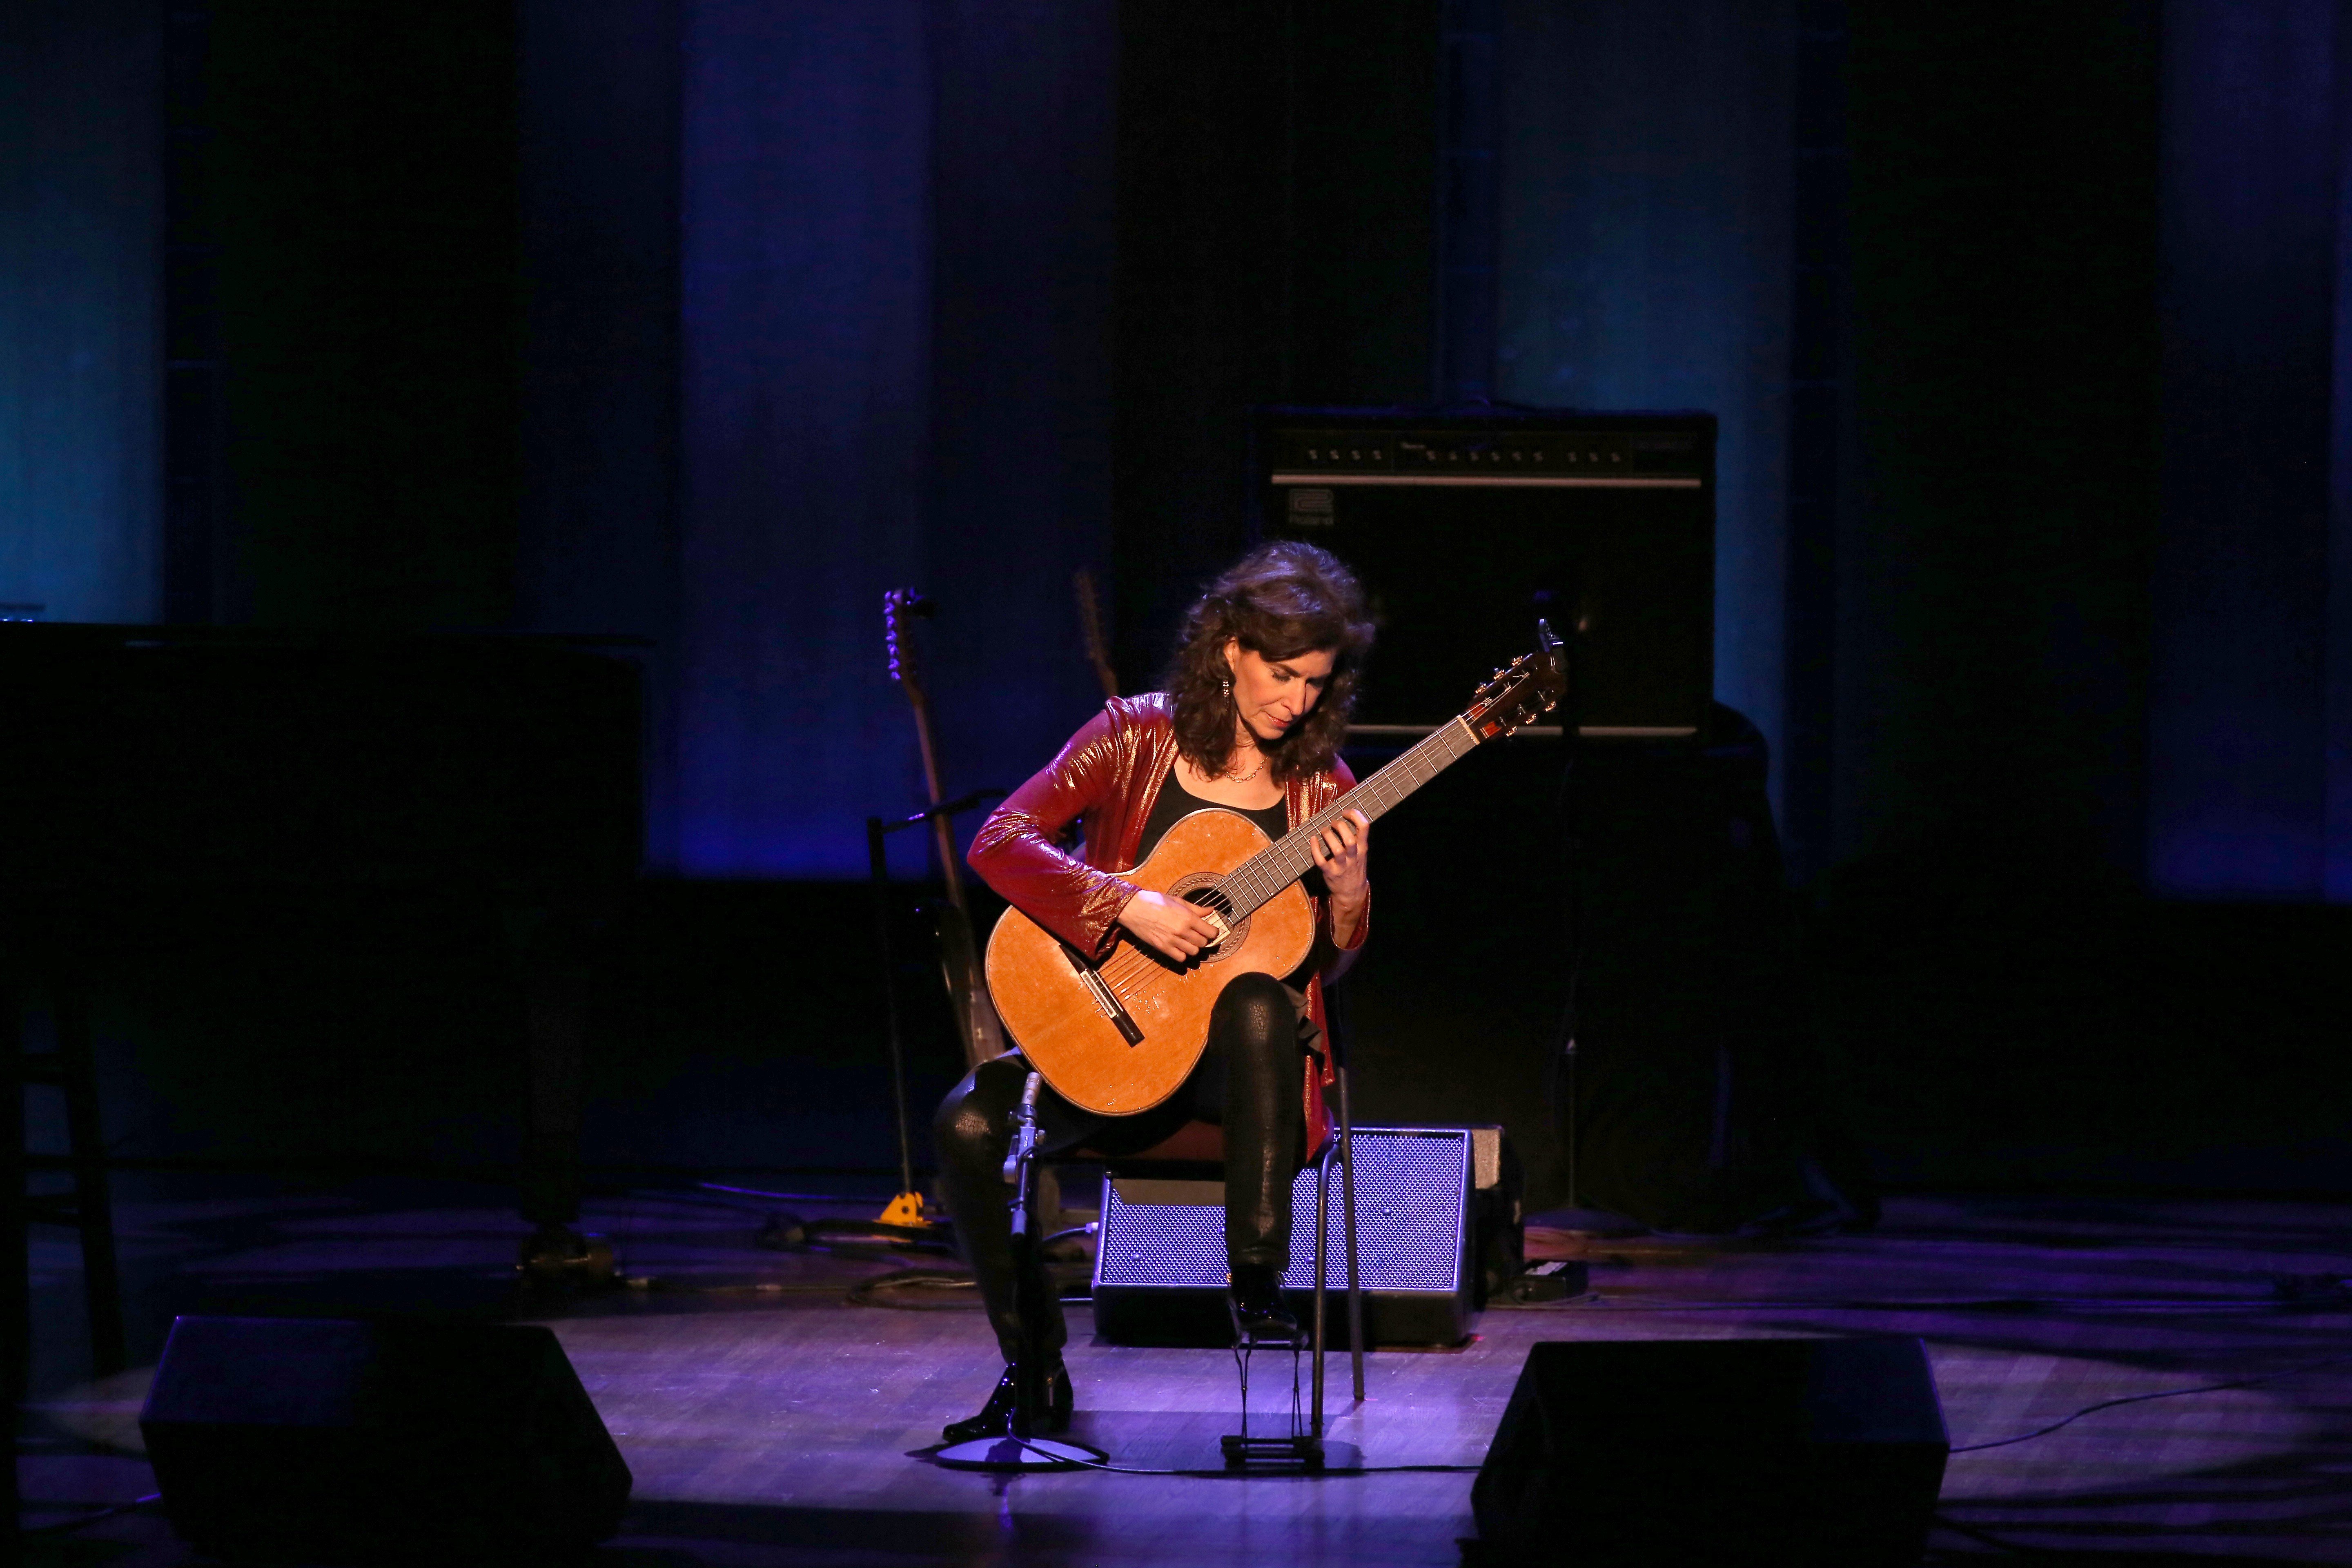 Sharon Isbin performs at the Kennedy Centre in Washington. The classical guitarist returns to Hong Kong for the first time in 25 years on Friday when she performs with the City Chamber Orchestra of Hong Kong. Photo: Tasos Katopodis/Getty Images for David Lynch Foundation/AFP